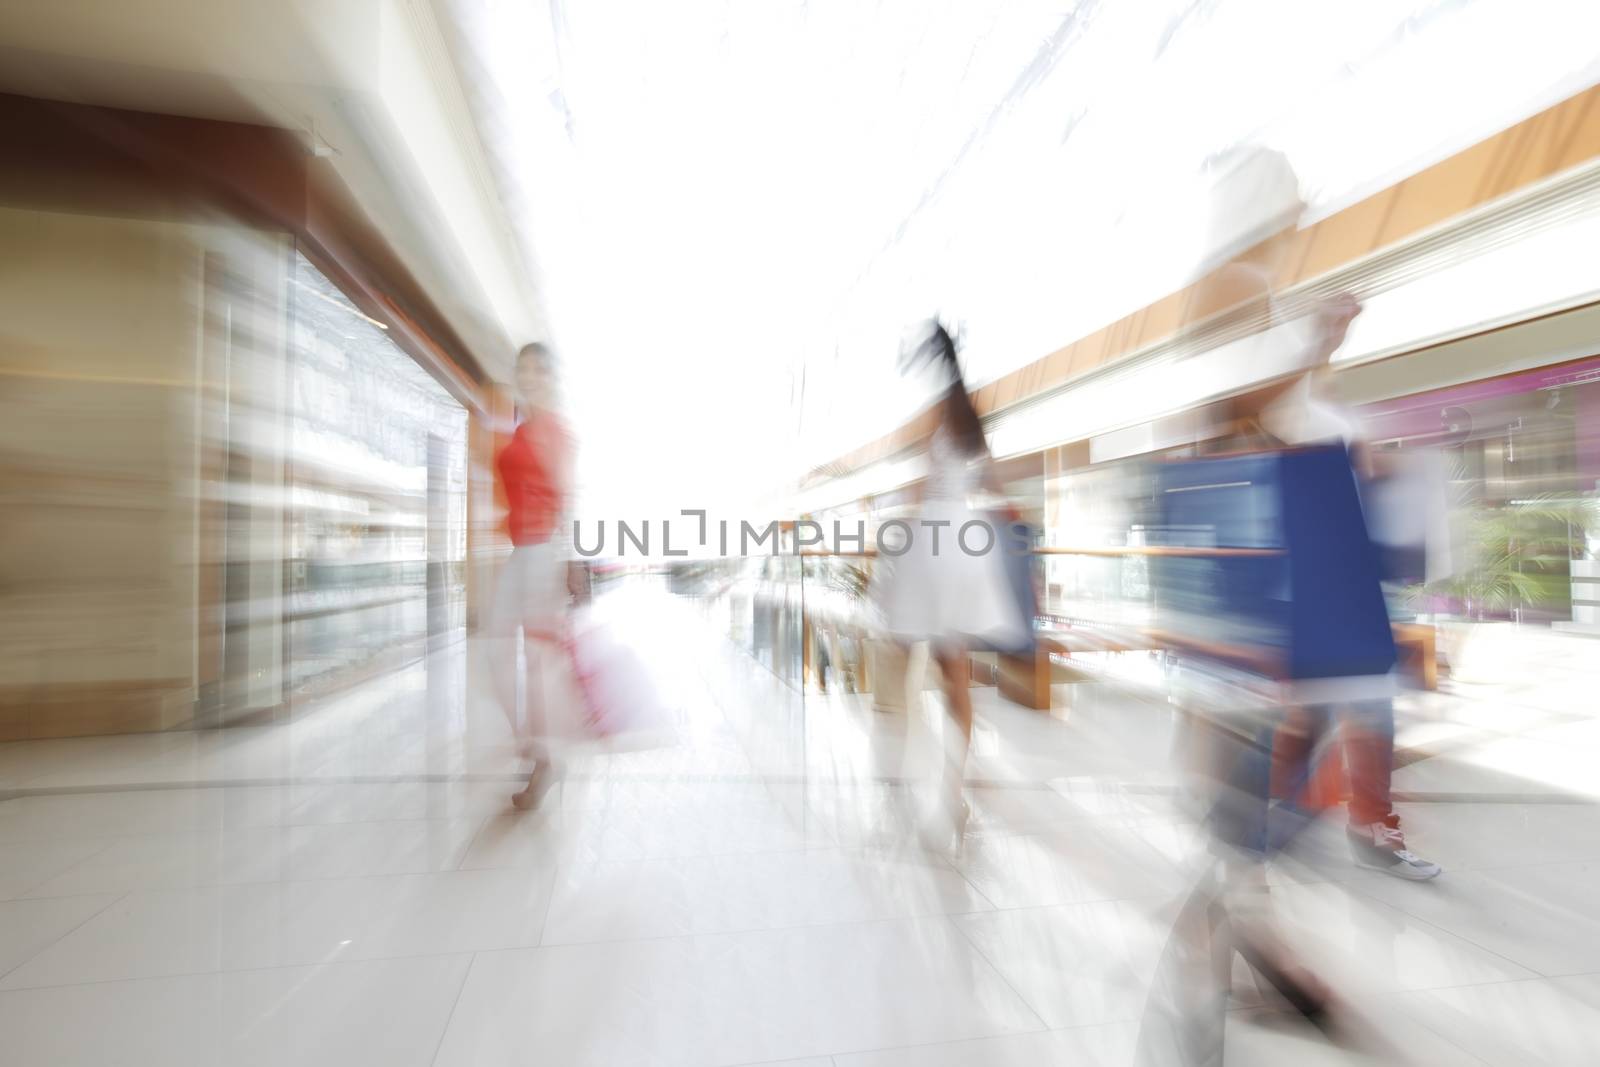 Women walking fast in shopping mall with bags